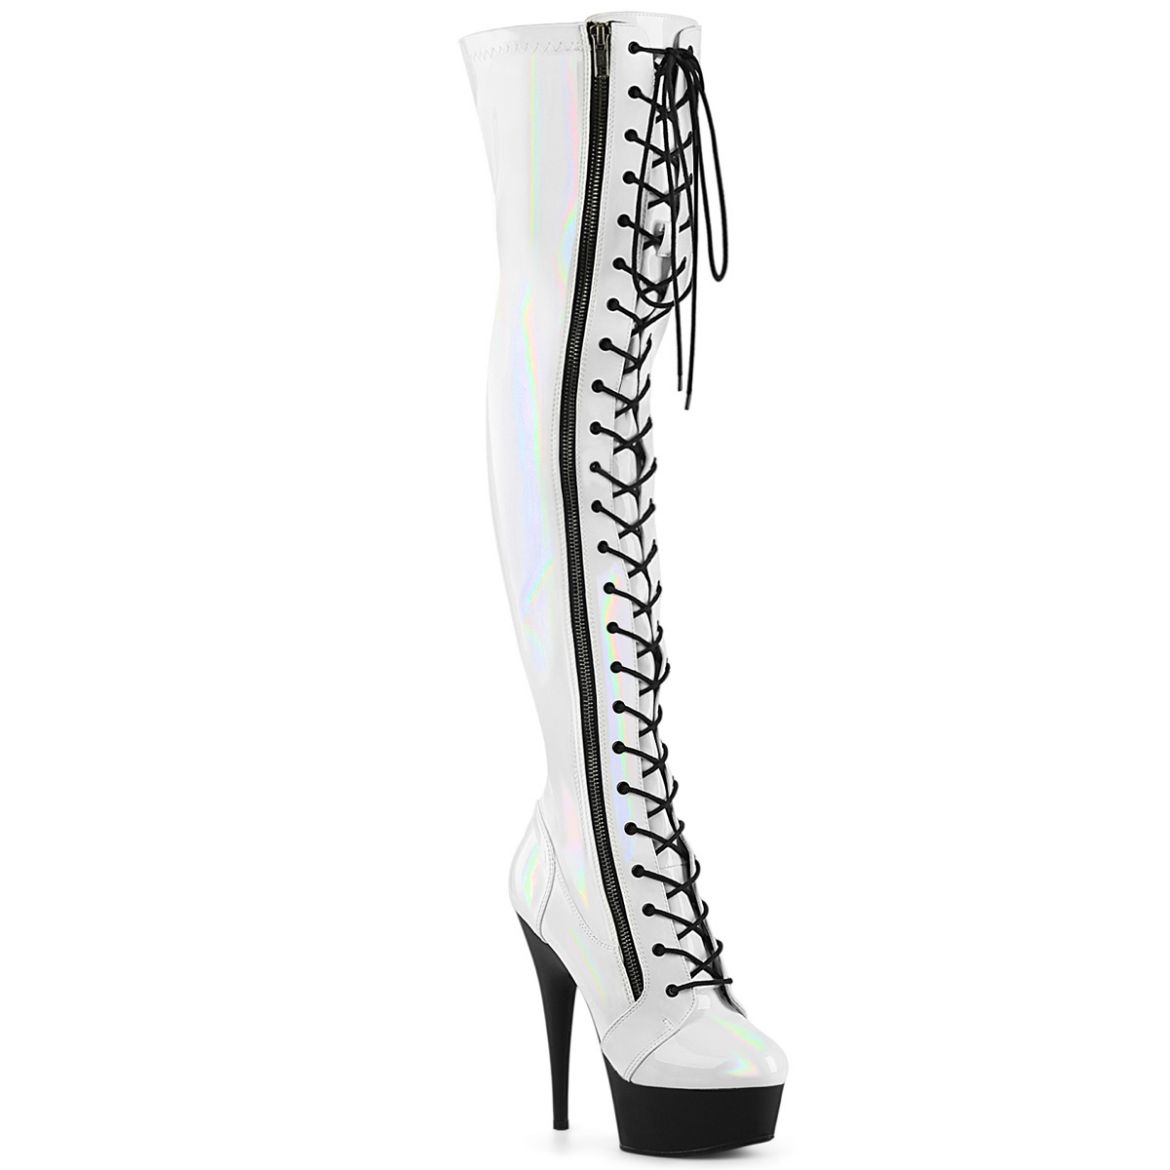 Product image of Pleaser DELIGHT-3029 Wht Str Hologram Pat/Blk Matte 6 Inch Heel 1 3/4 Inch PF Stretch Lace-Up OTK Boot Outer Zip